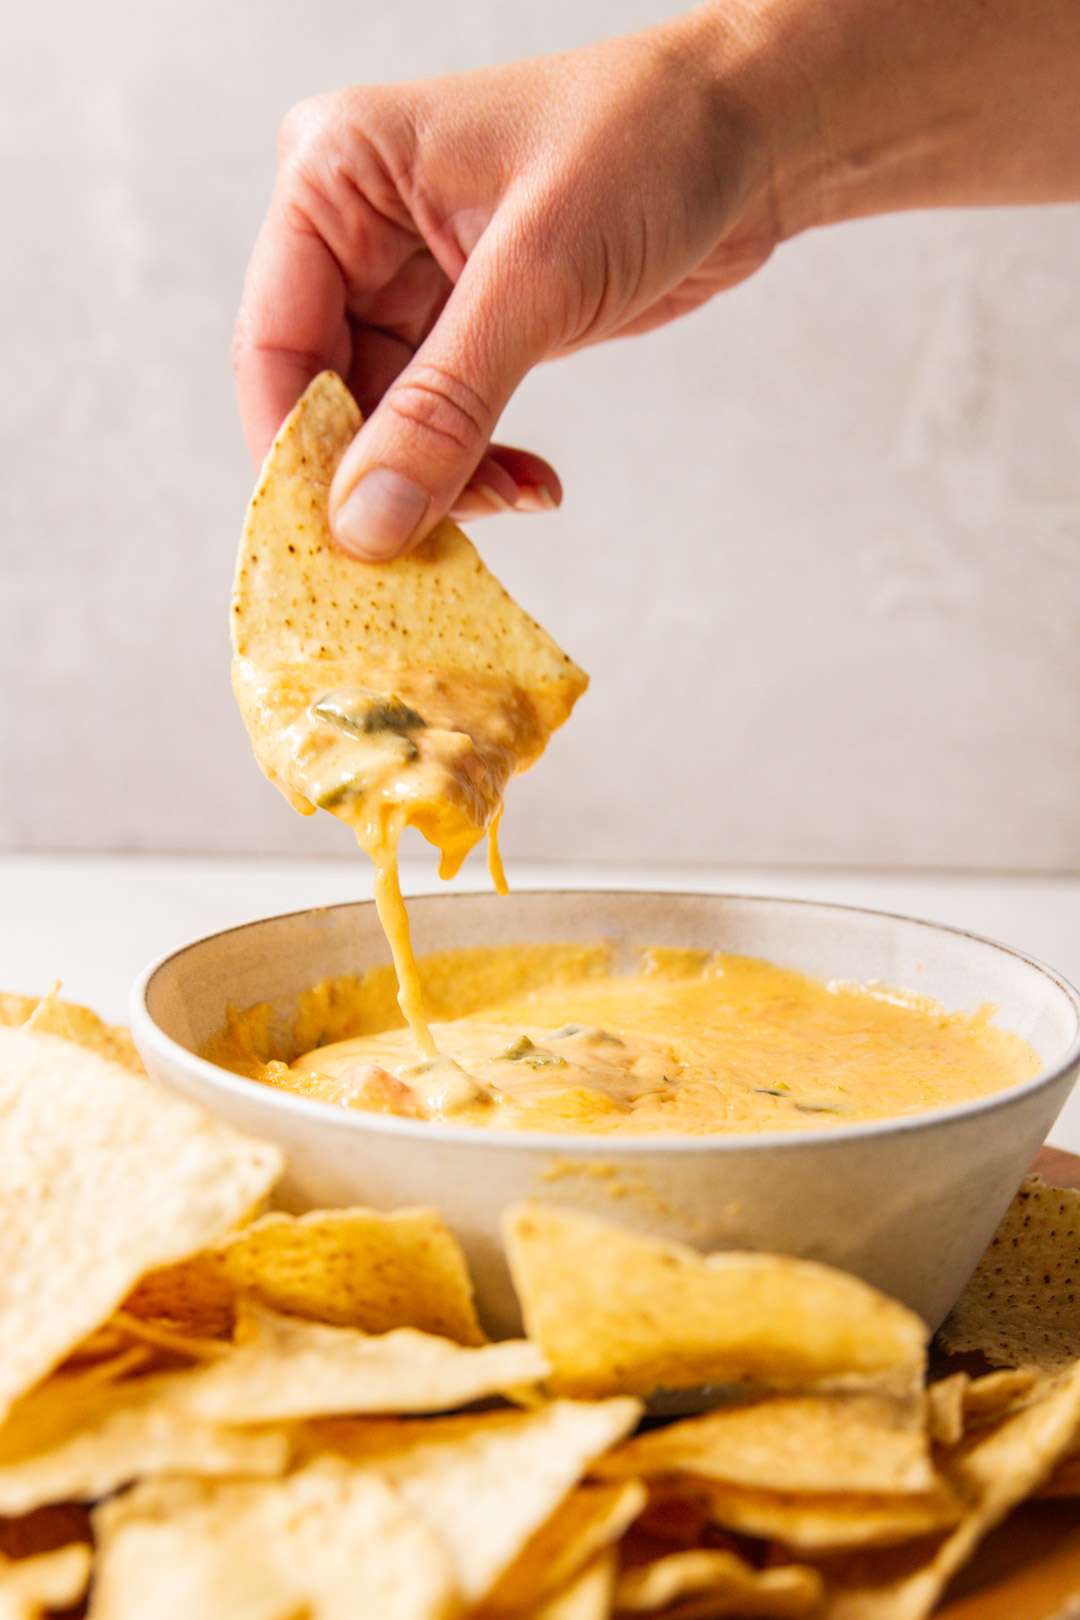 Tortilla chip dipping in cheese dip